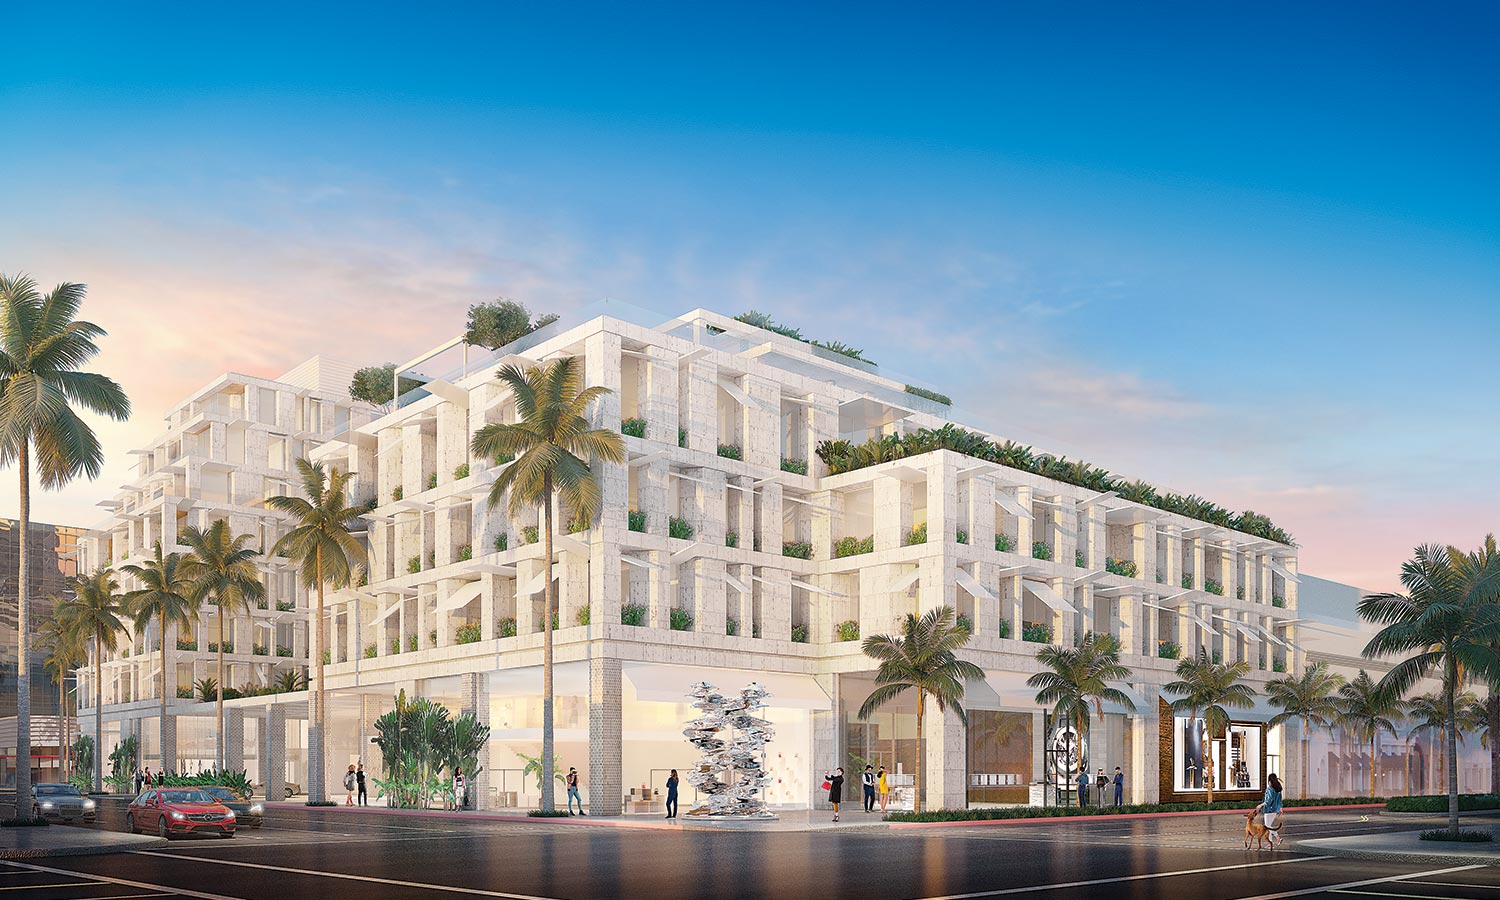 Planning Approves Dior French Restaurant on Rodeo Dr. - Beverly Hills  Courier